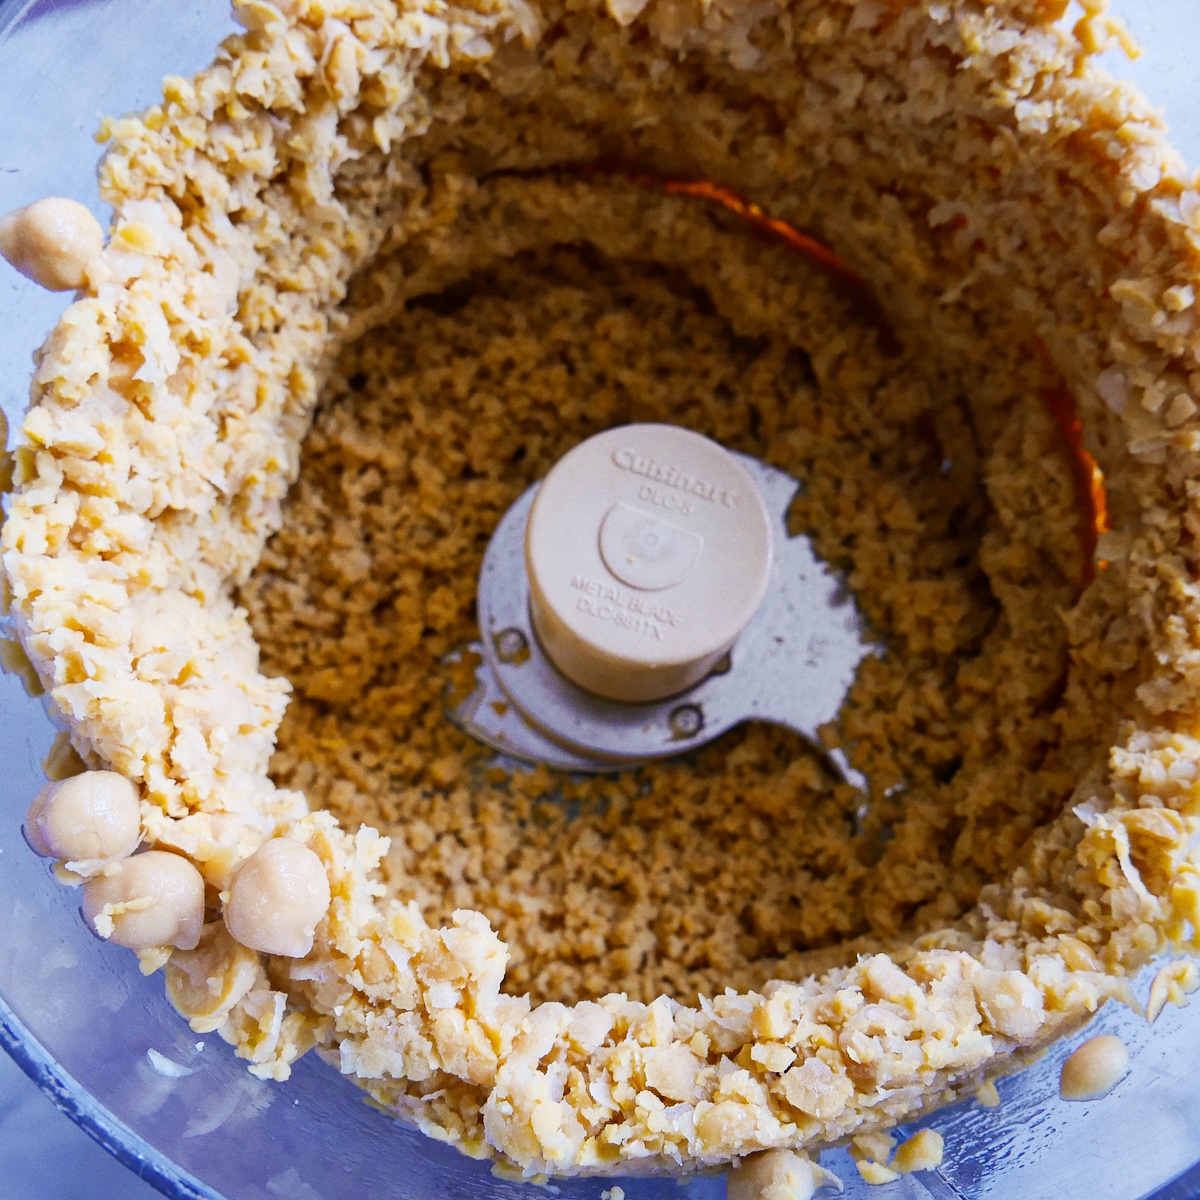 Chickpeas blended in a food processor.